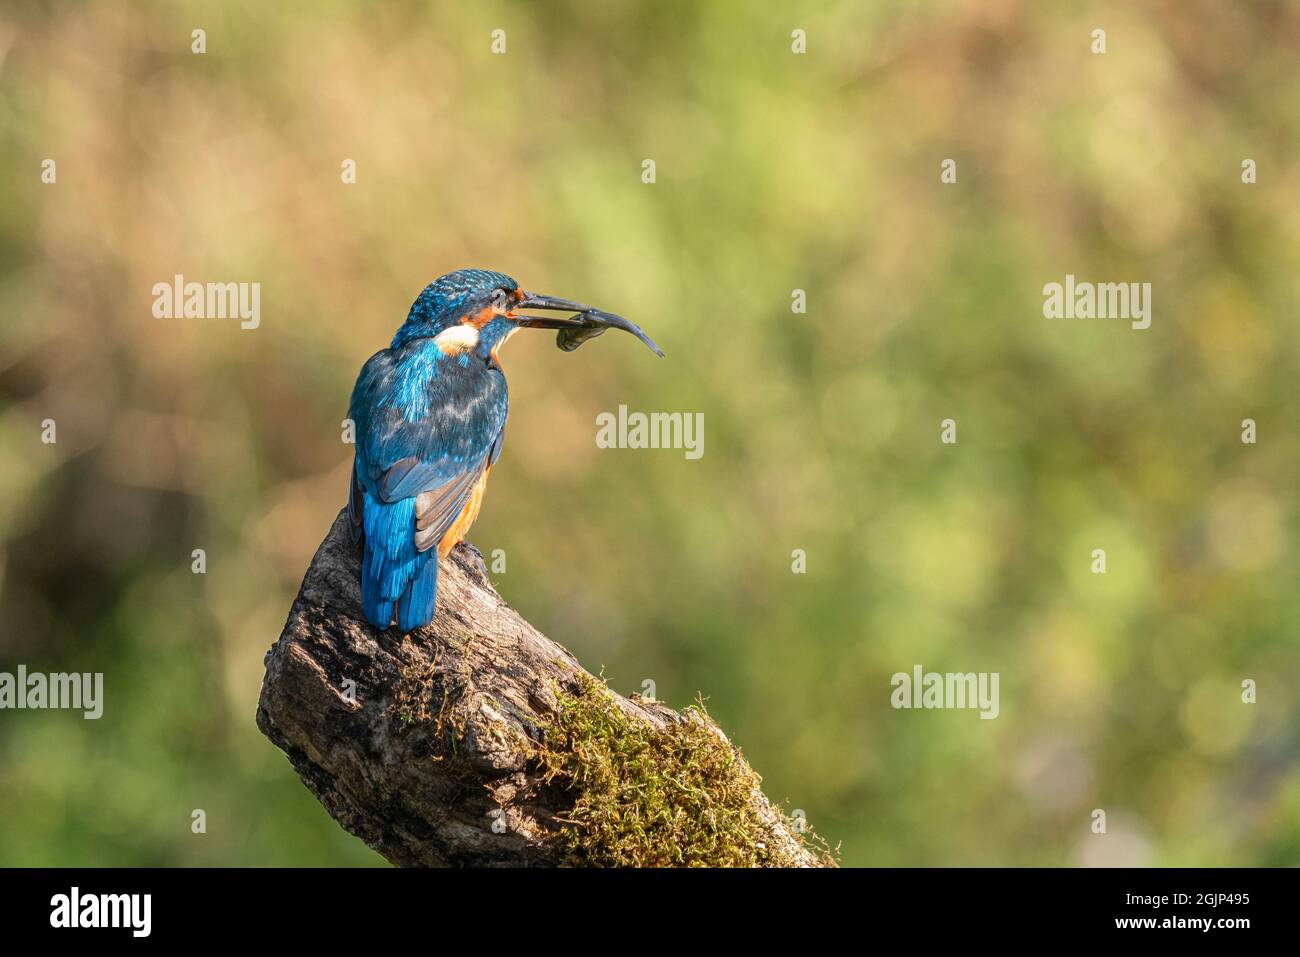 Kingfisher perched on log waiting to dive into water. Stock Photo